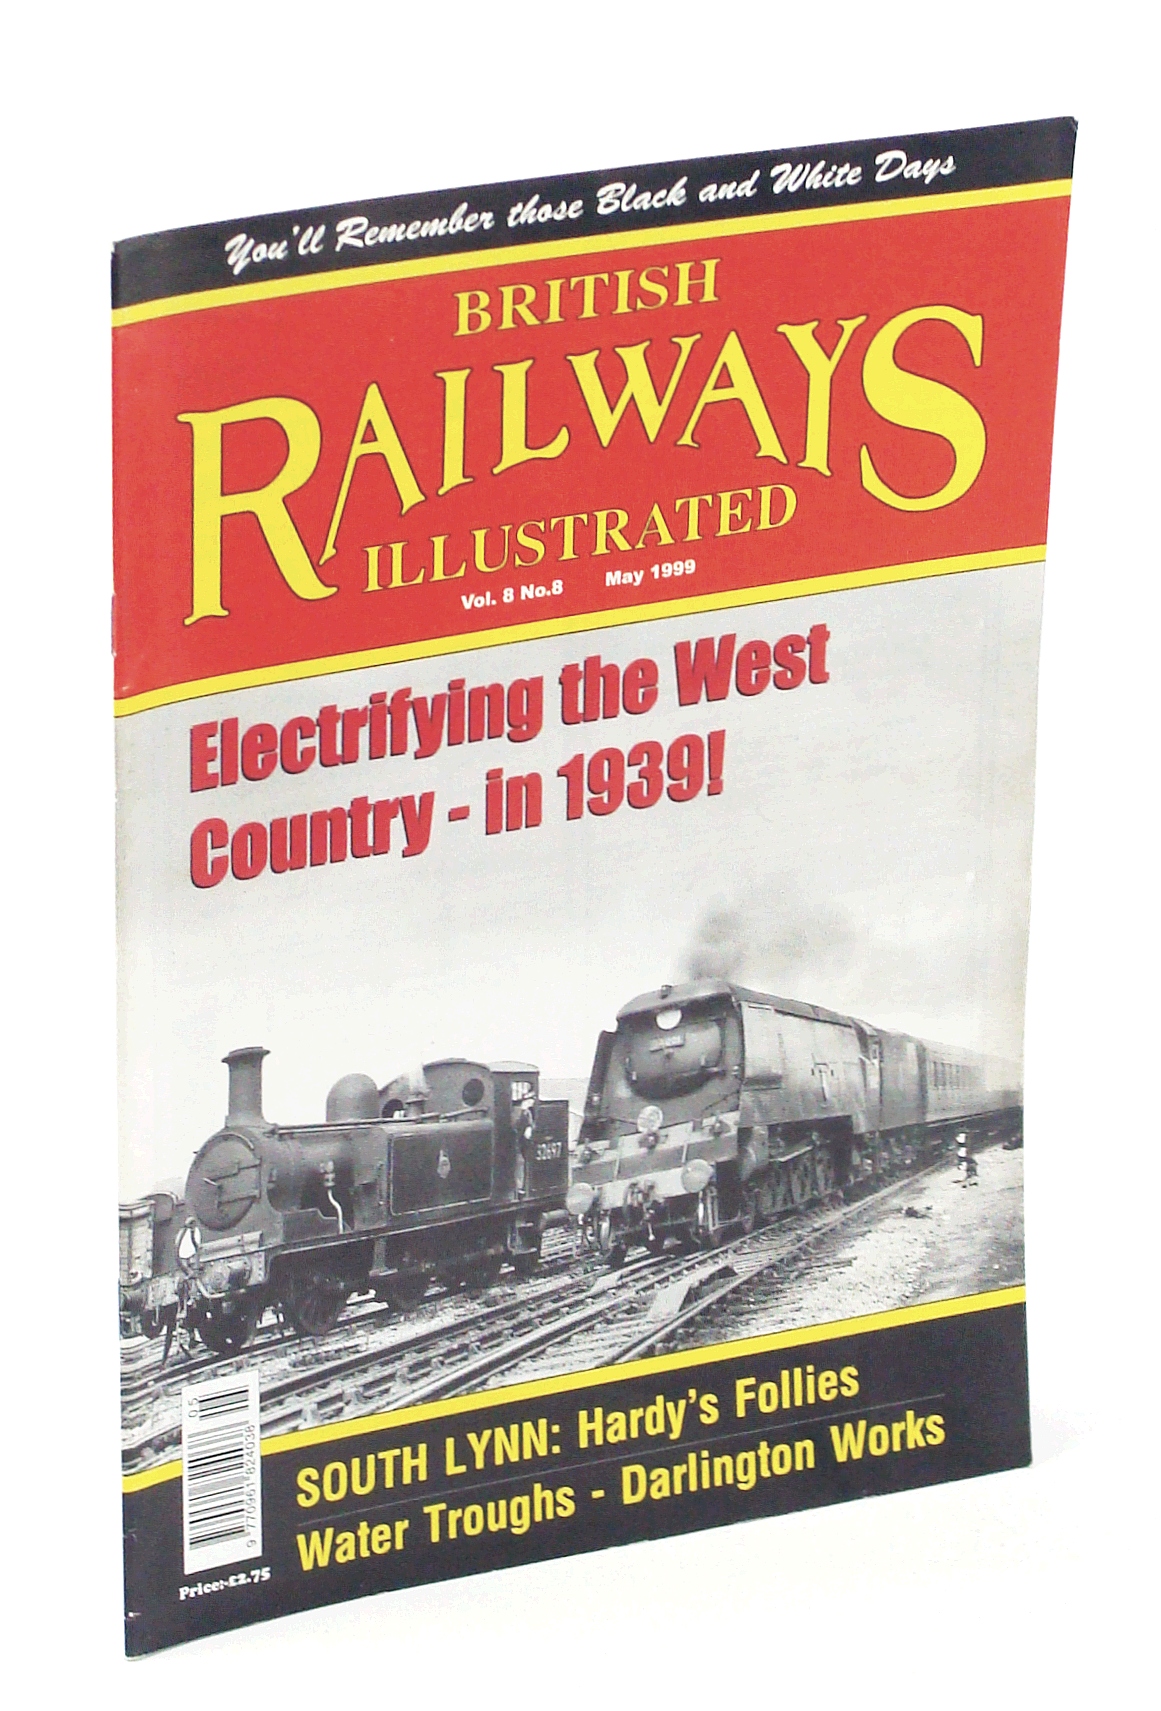 Image for British Railways Illustrated, May 1999, Vol. 8 No. 8: Electrifying the West Country - In 1939!